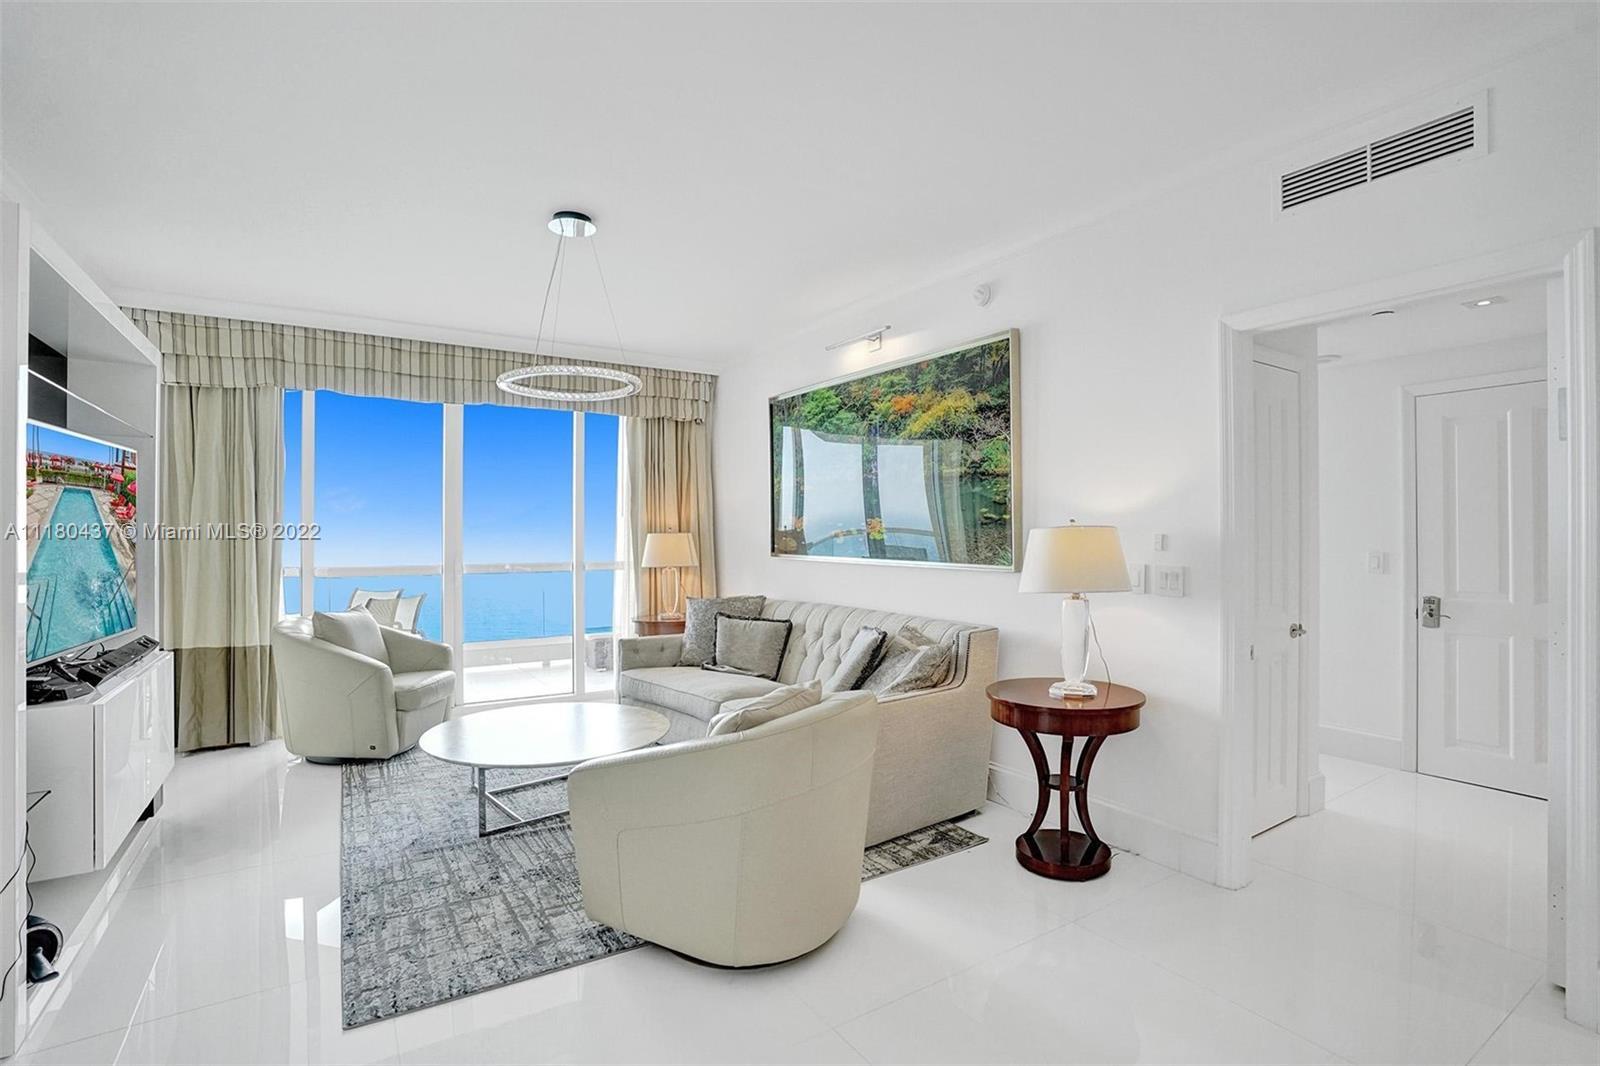 BEACHFRONT! Rarely available 04 model, perfectly situated on the 35th floor at the prized Acqualina 